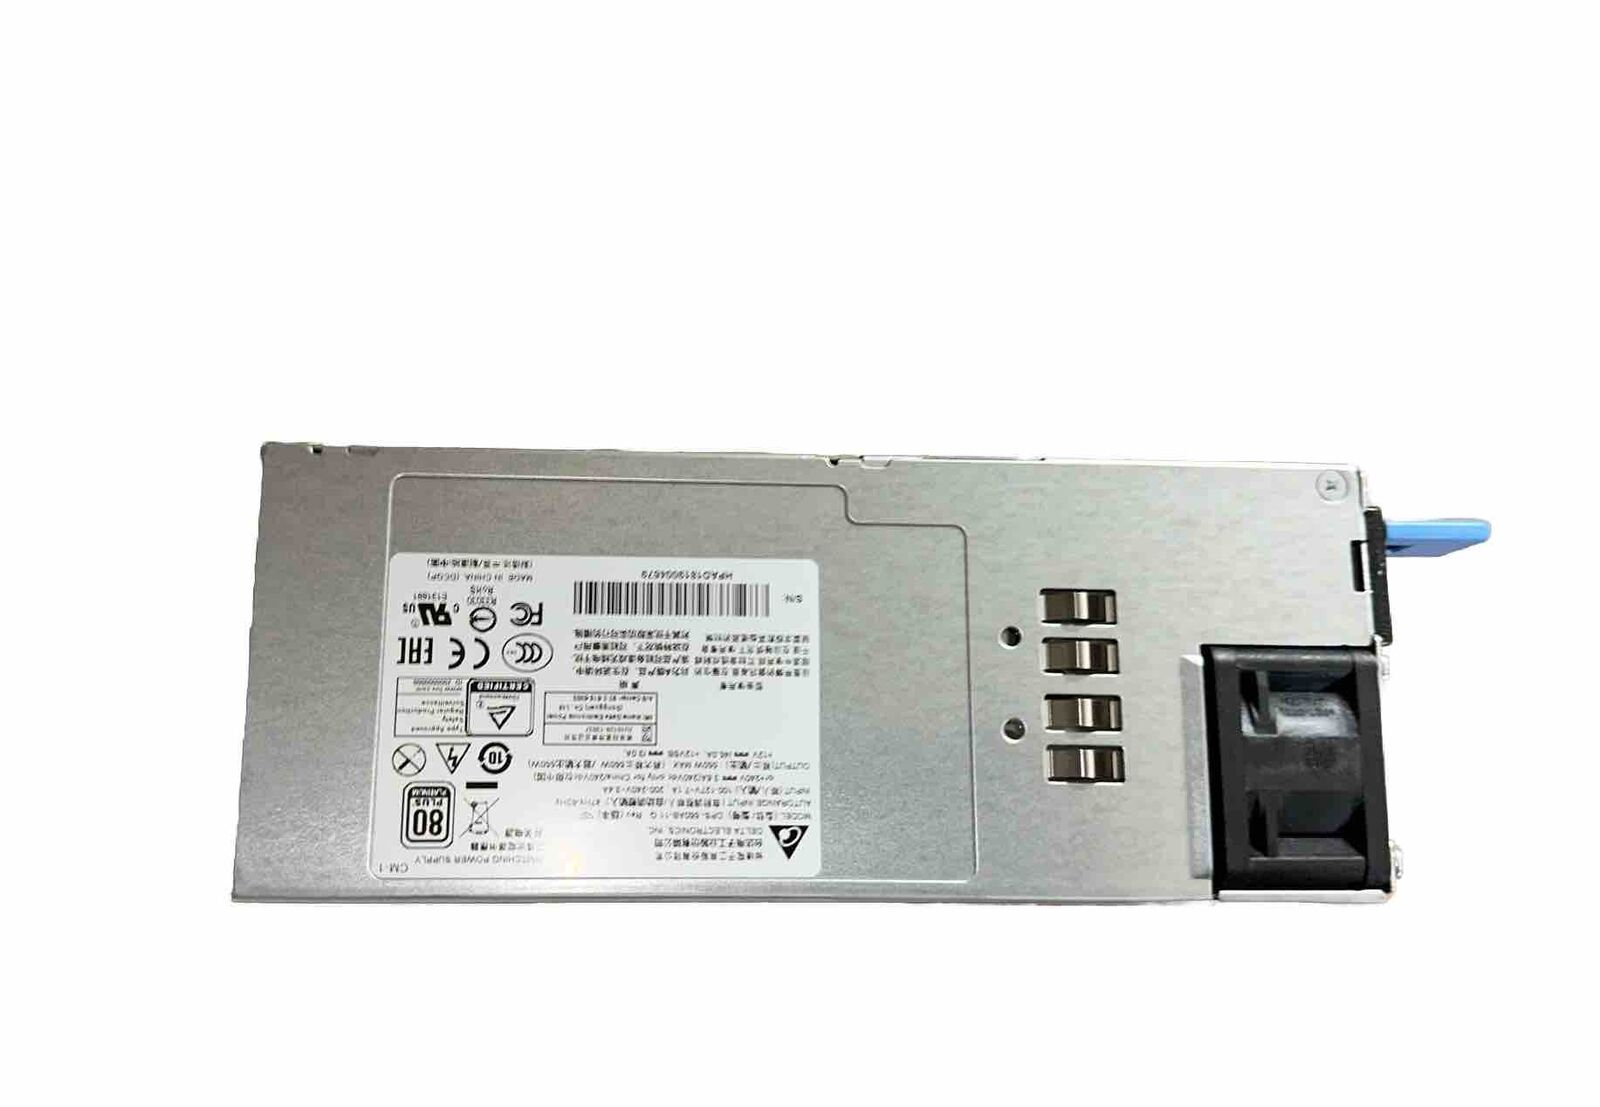 CPAC-PSU-AC-15000 Check Point REPLACEMENT POWER SUPPLY NEW